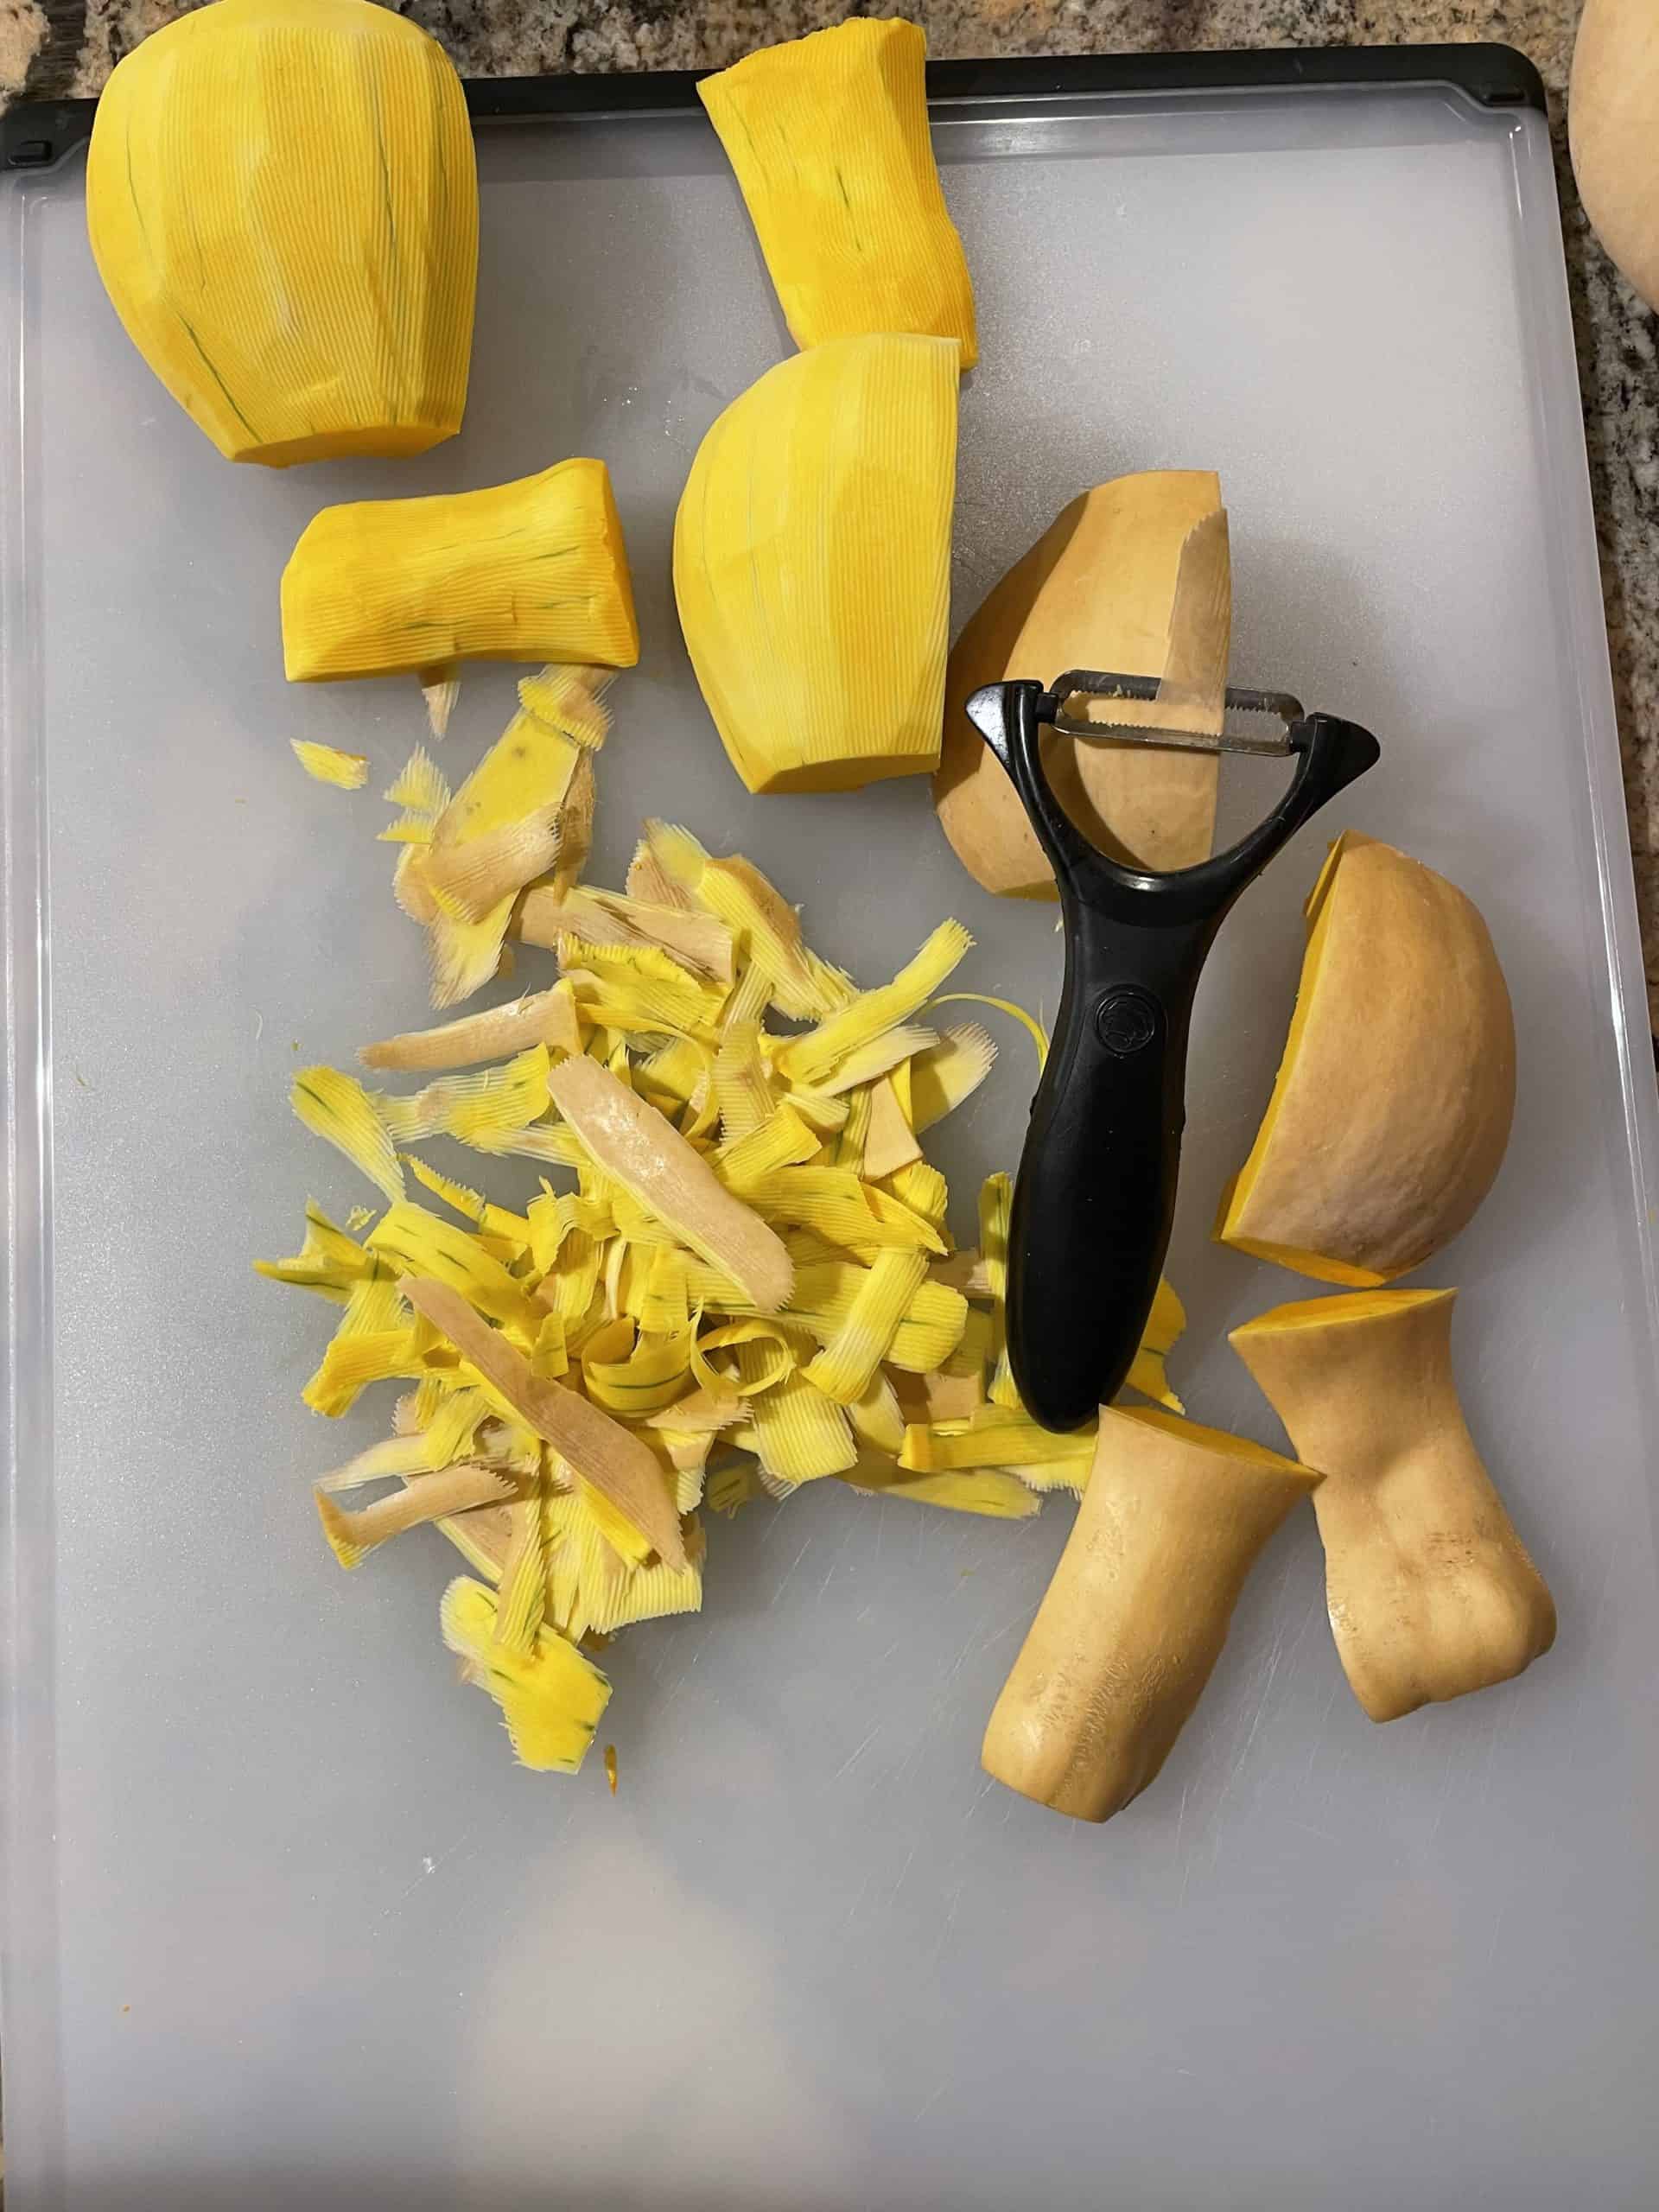 Cleaned, peeled and cut butternut squash.